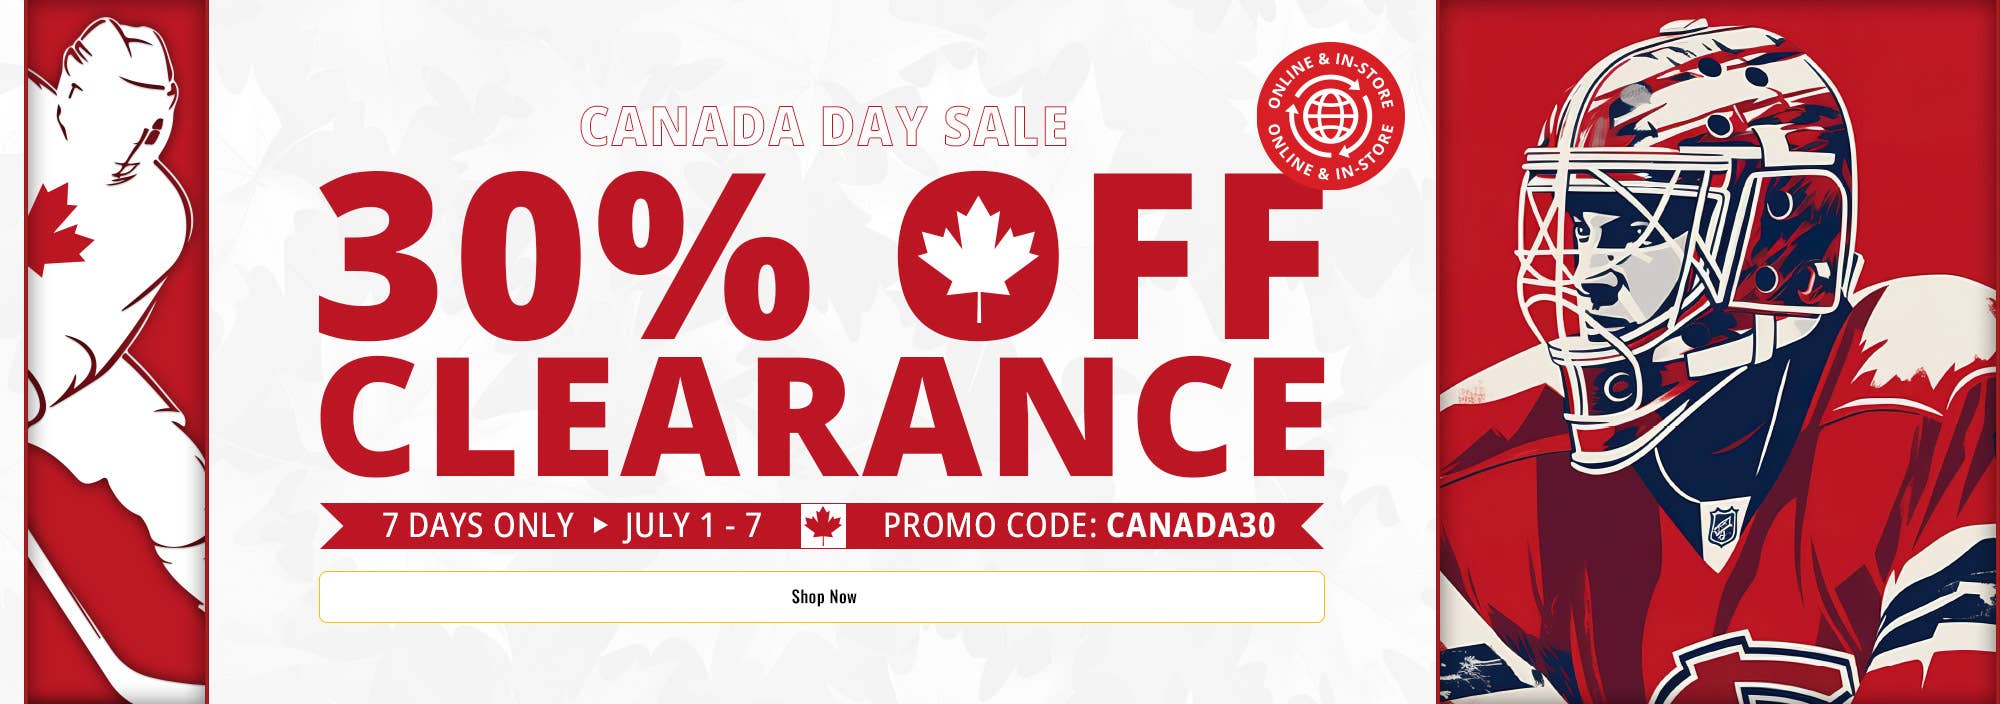 Canada Day Sale: 30% off clearance